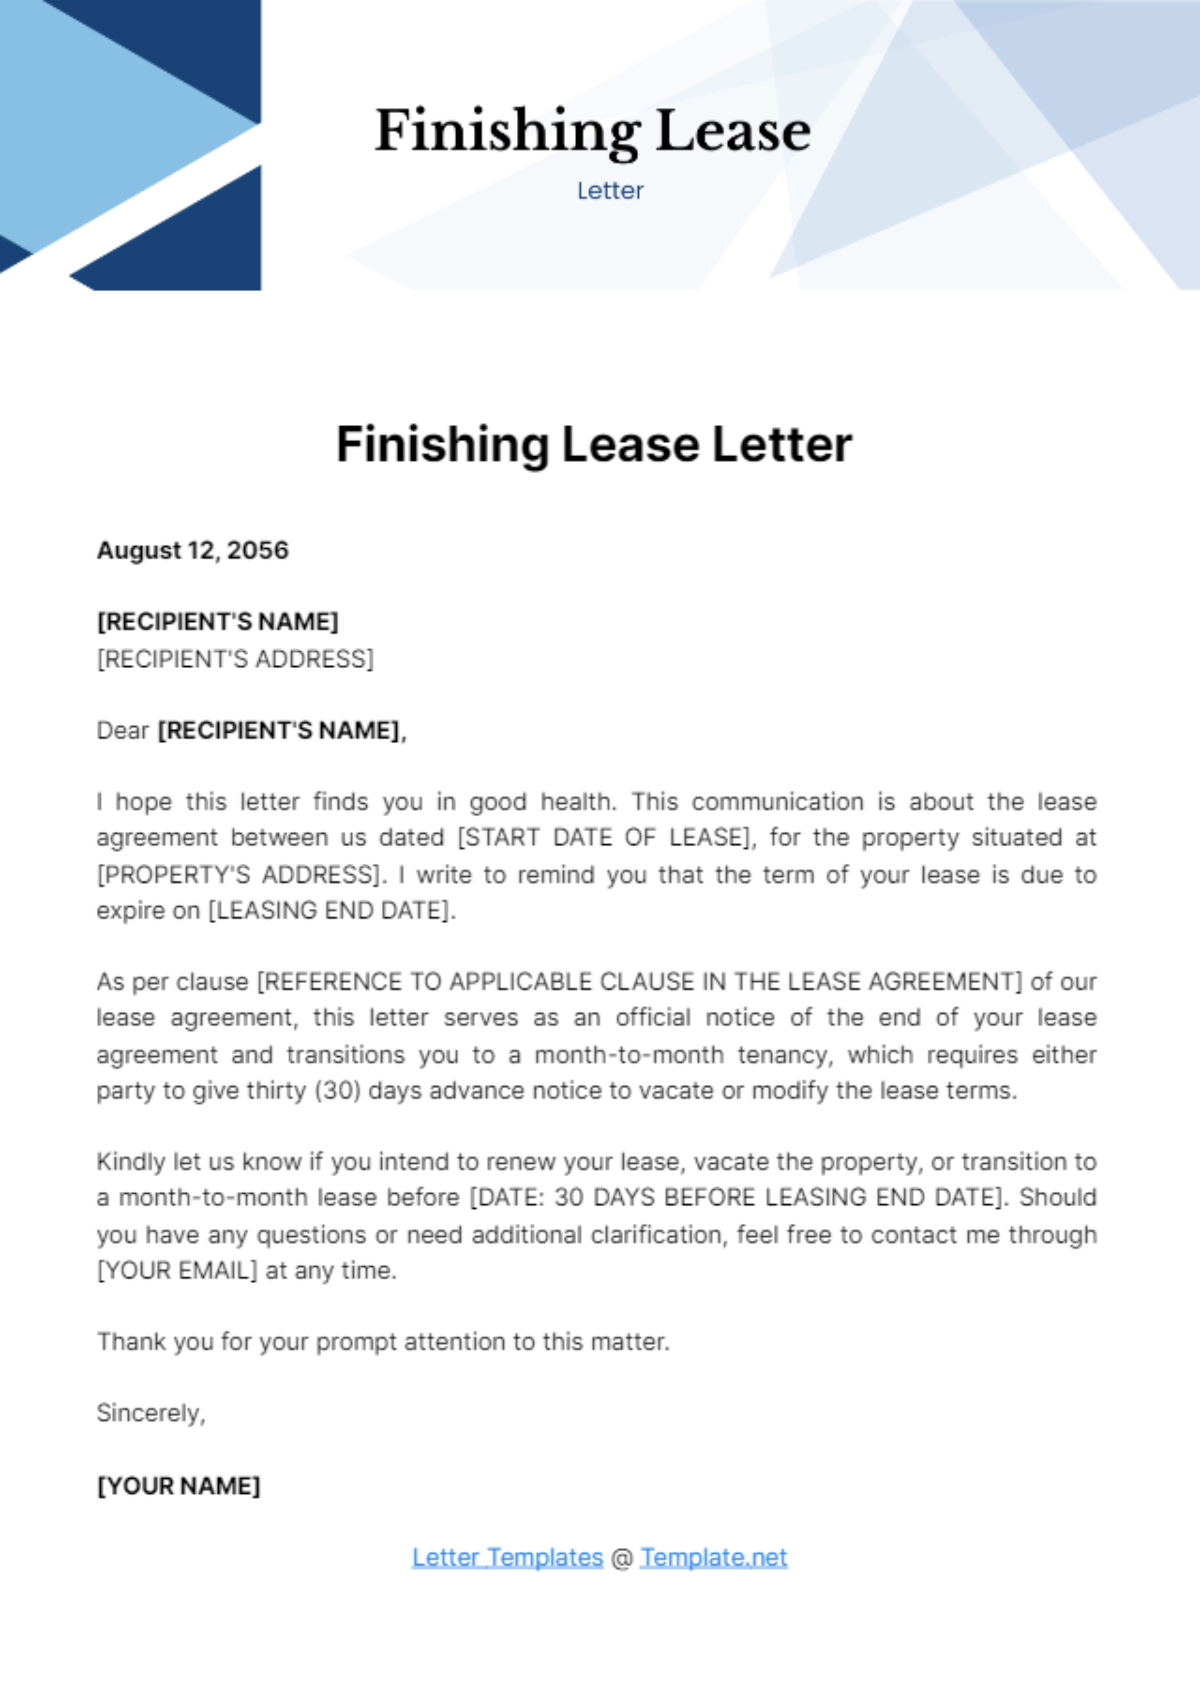 Free Finishing Lease Letter Template